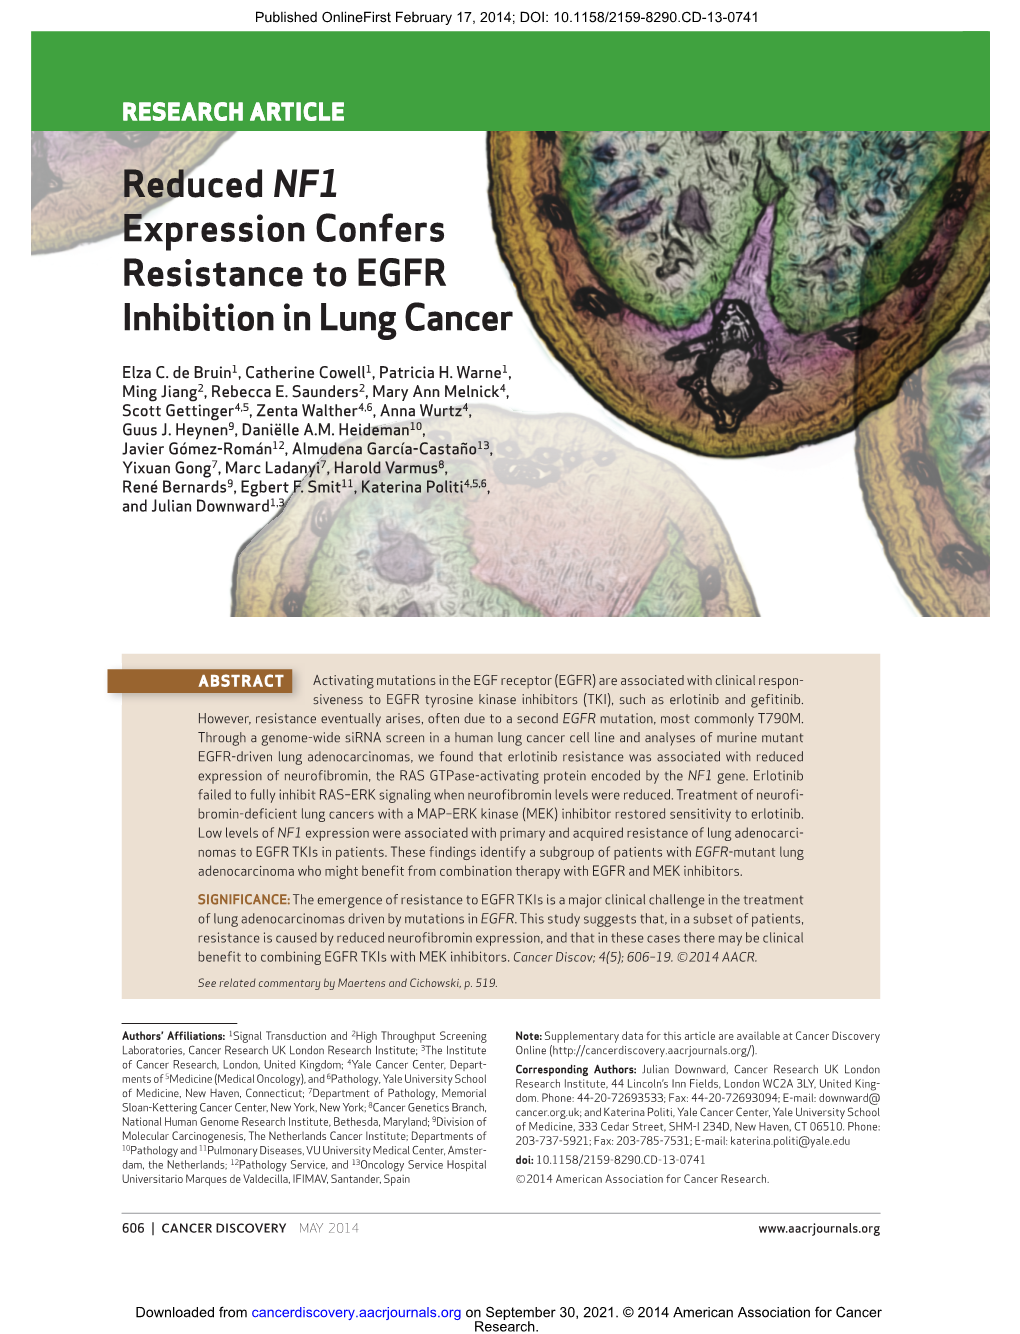 Reduced NF1 Expression Confers Resistance to EGFR Inhibition in Lung Cancer